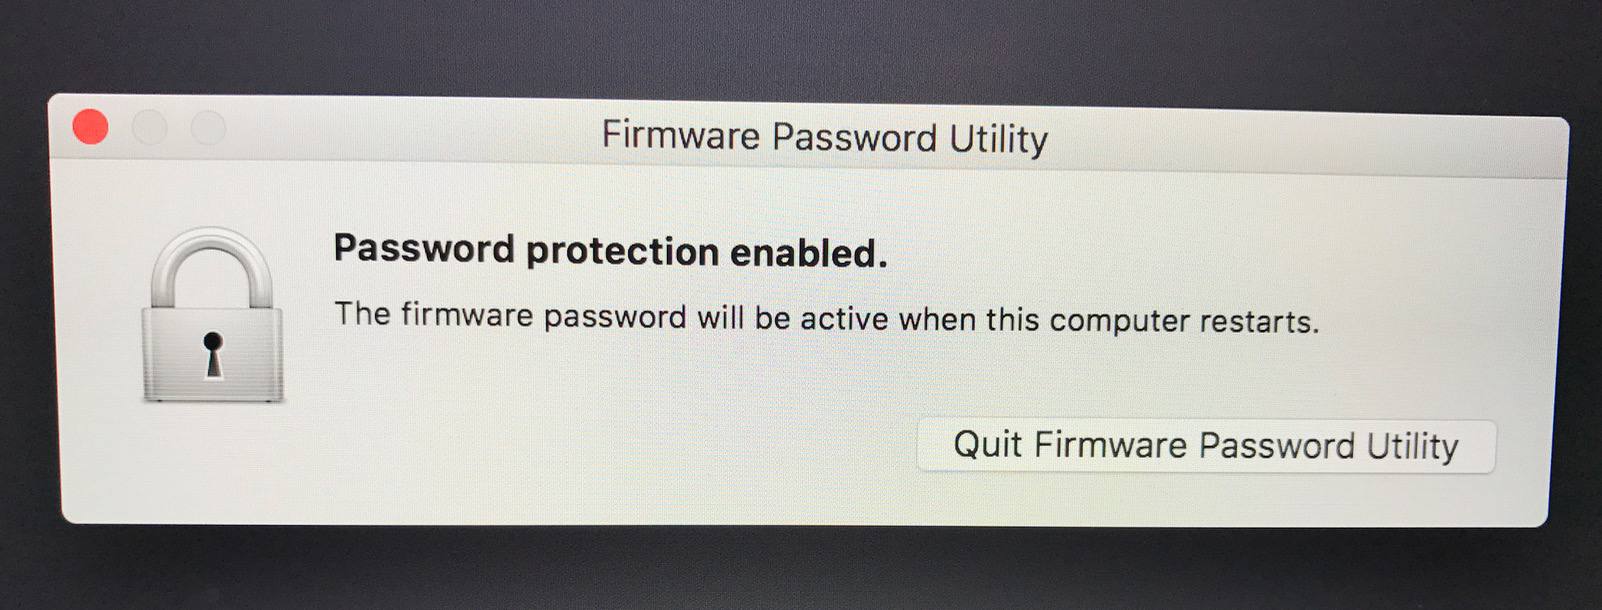 Firmware Password Utility shows password protection Enabled